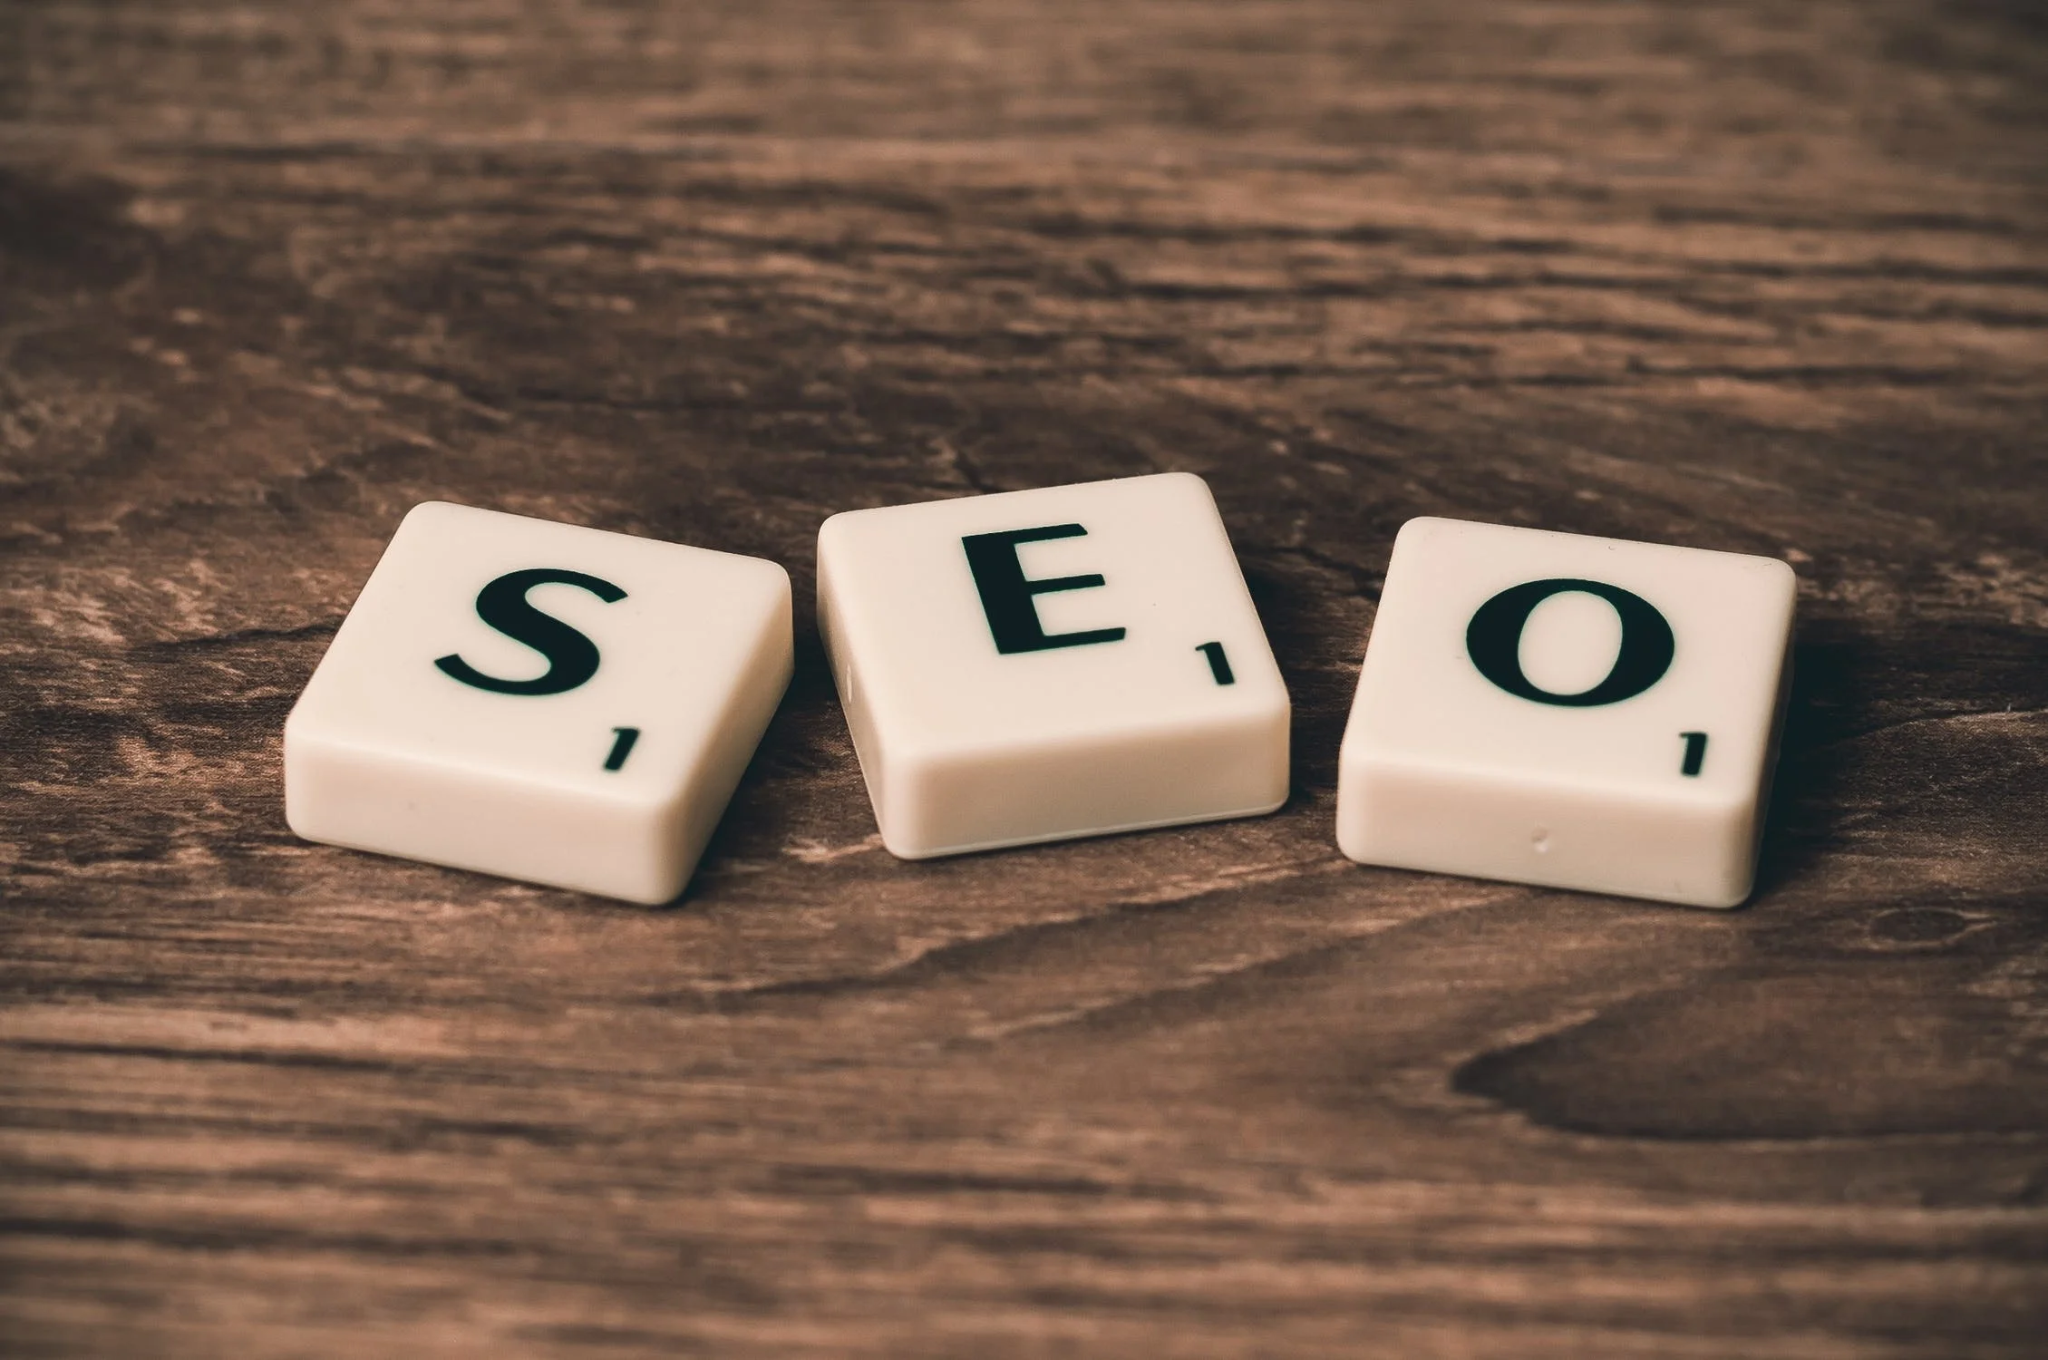 3 simple SEO tips that will help you grow your business